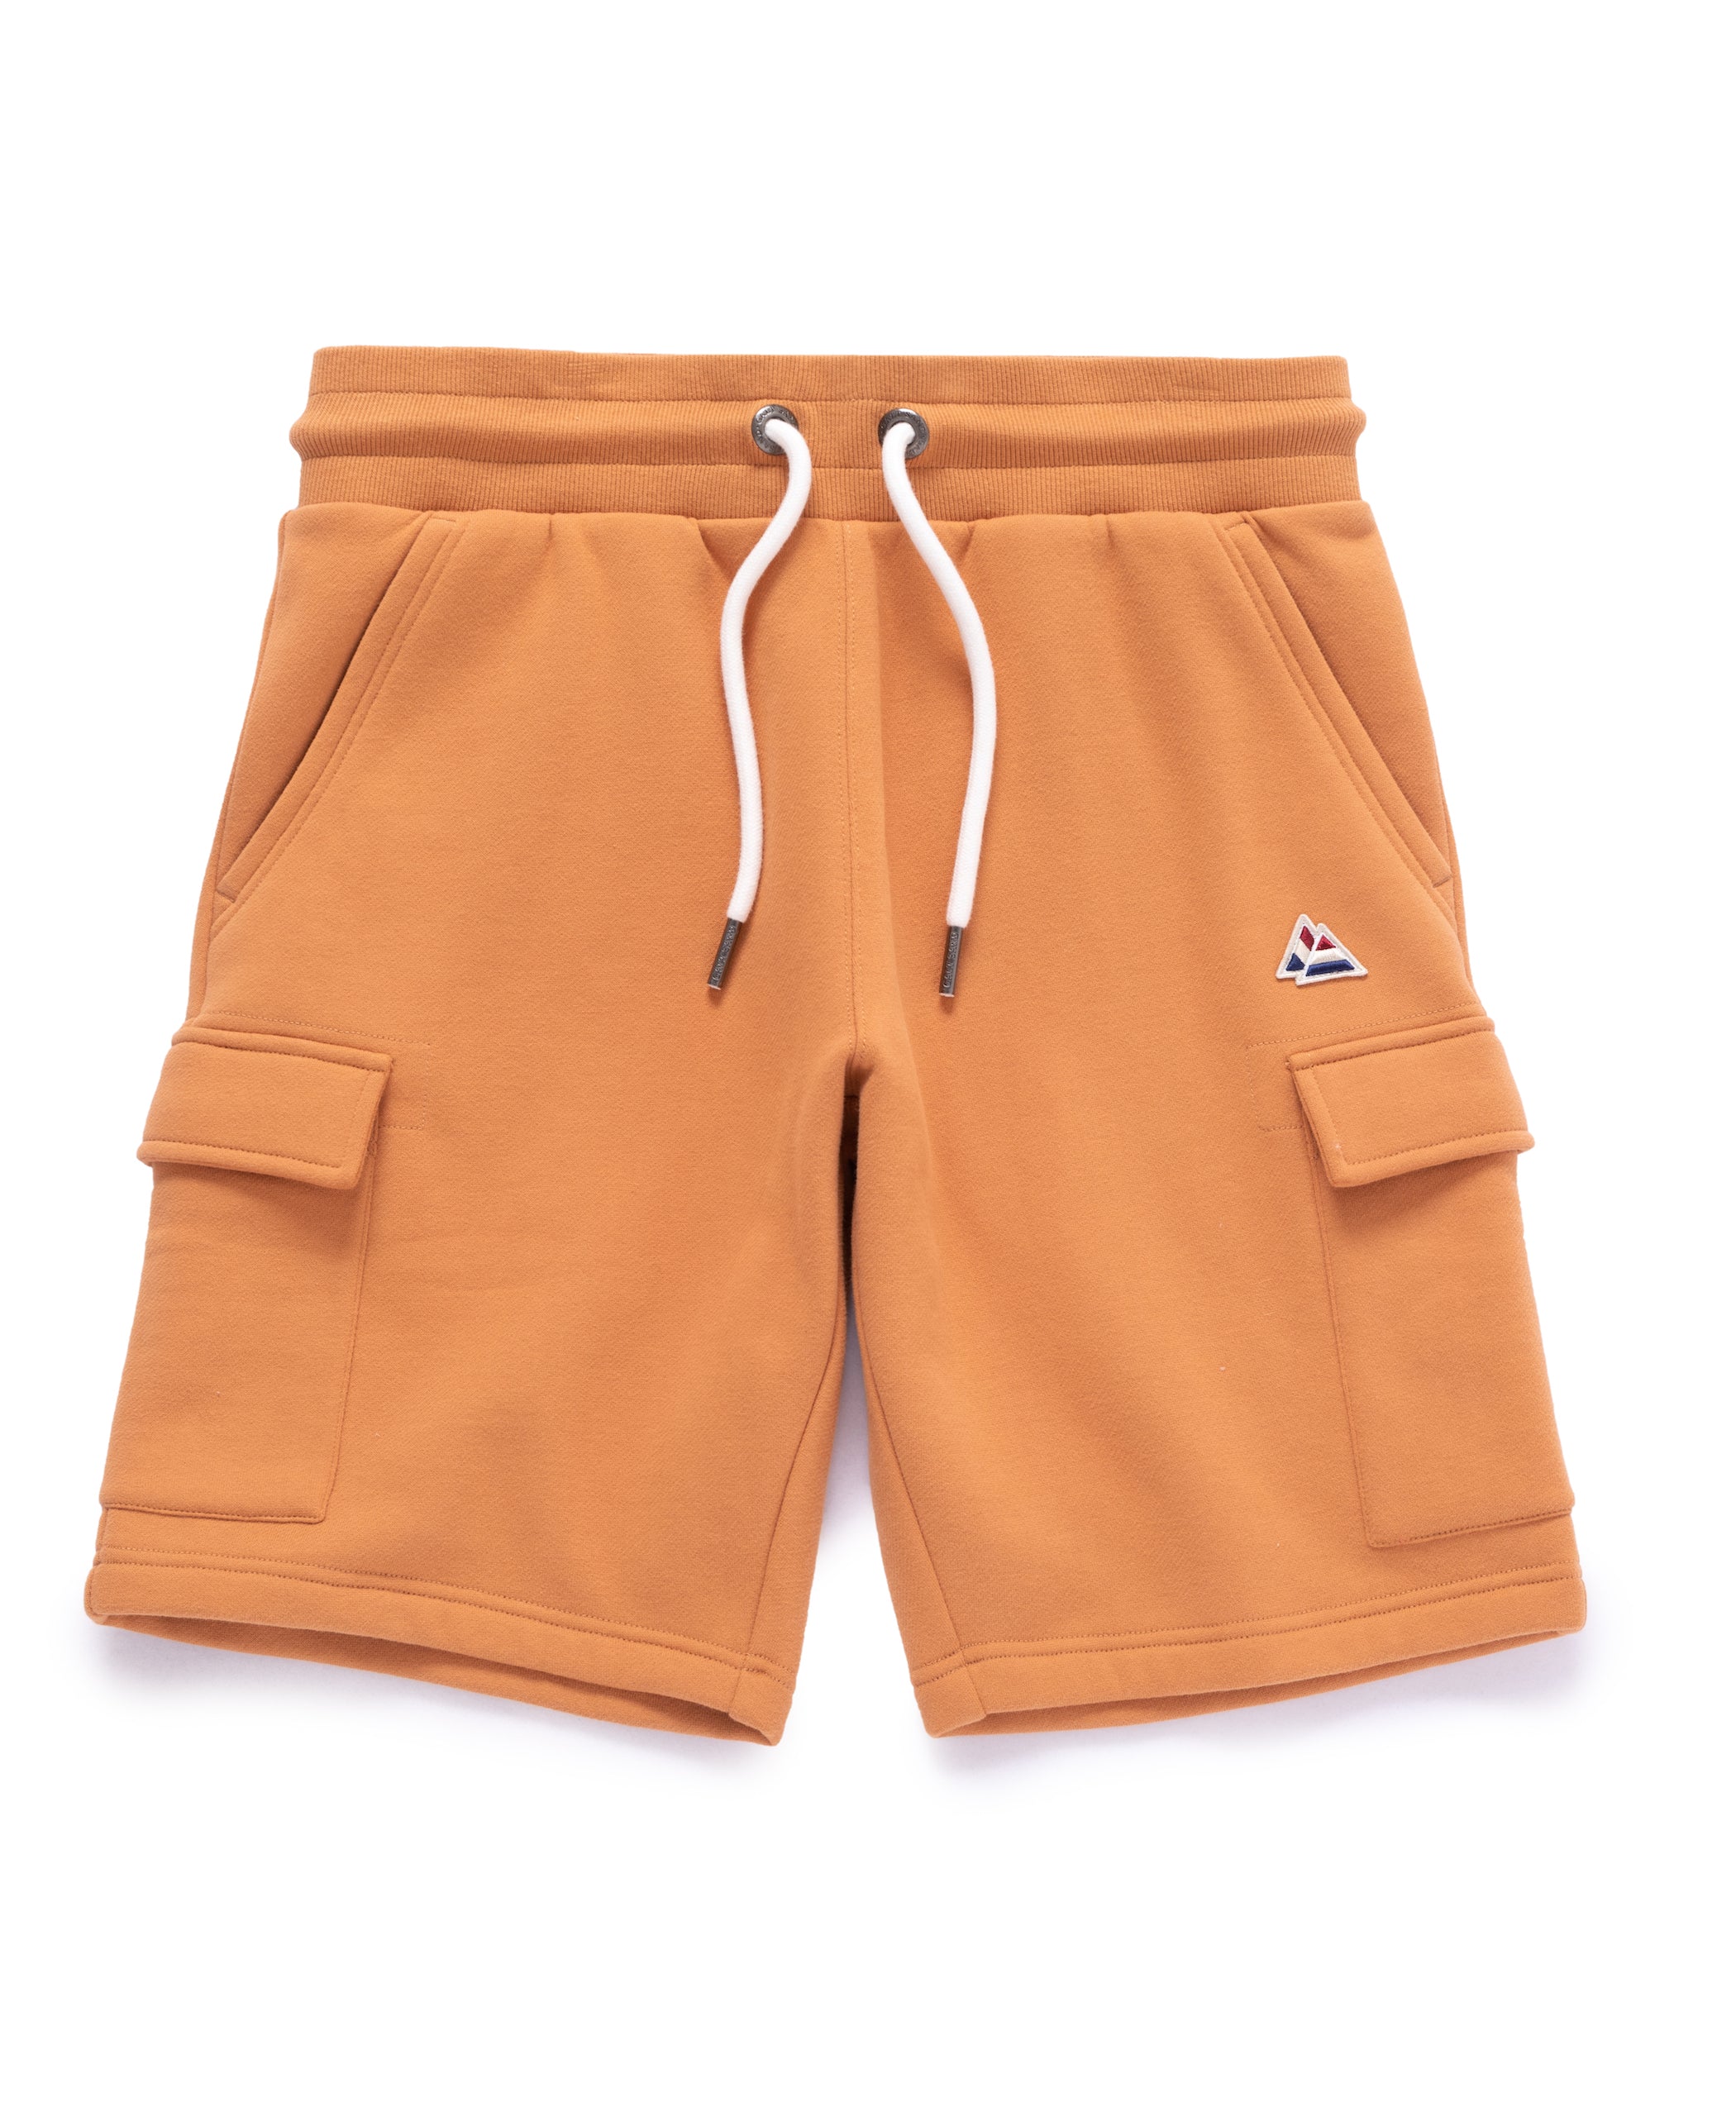 Classic Short with Cargo Pocket